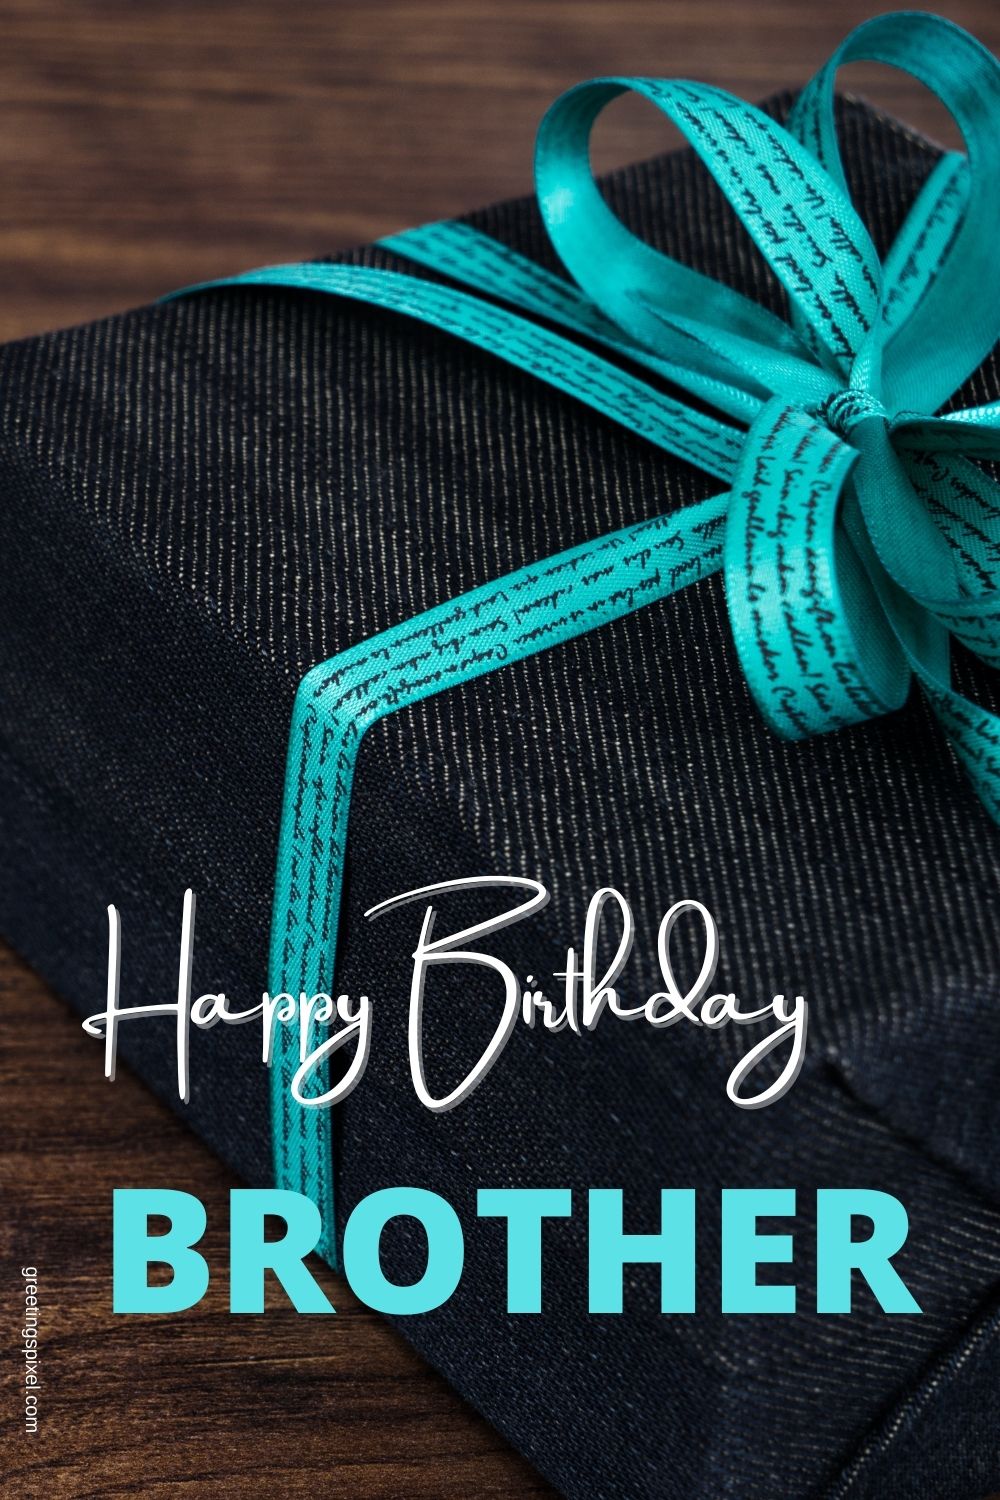 happy birthday images brother hd